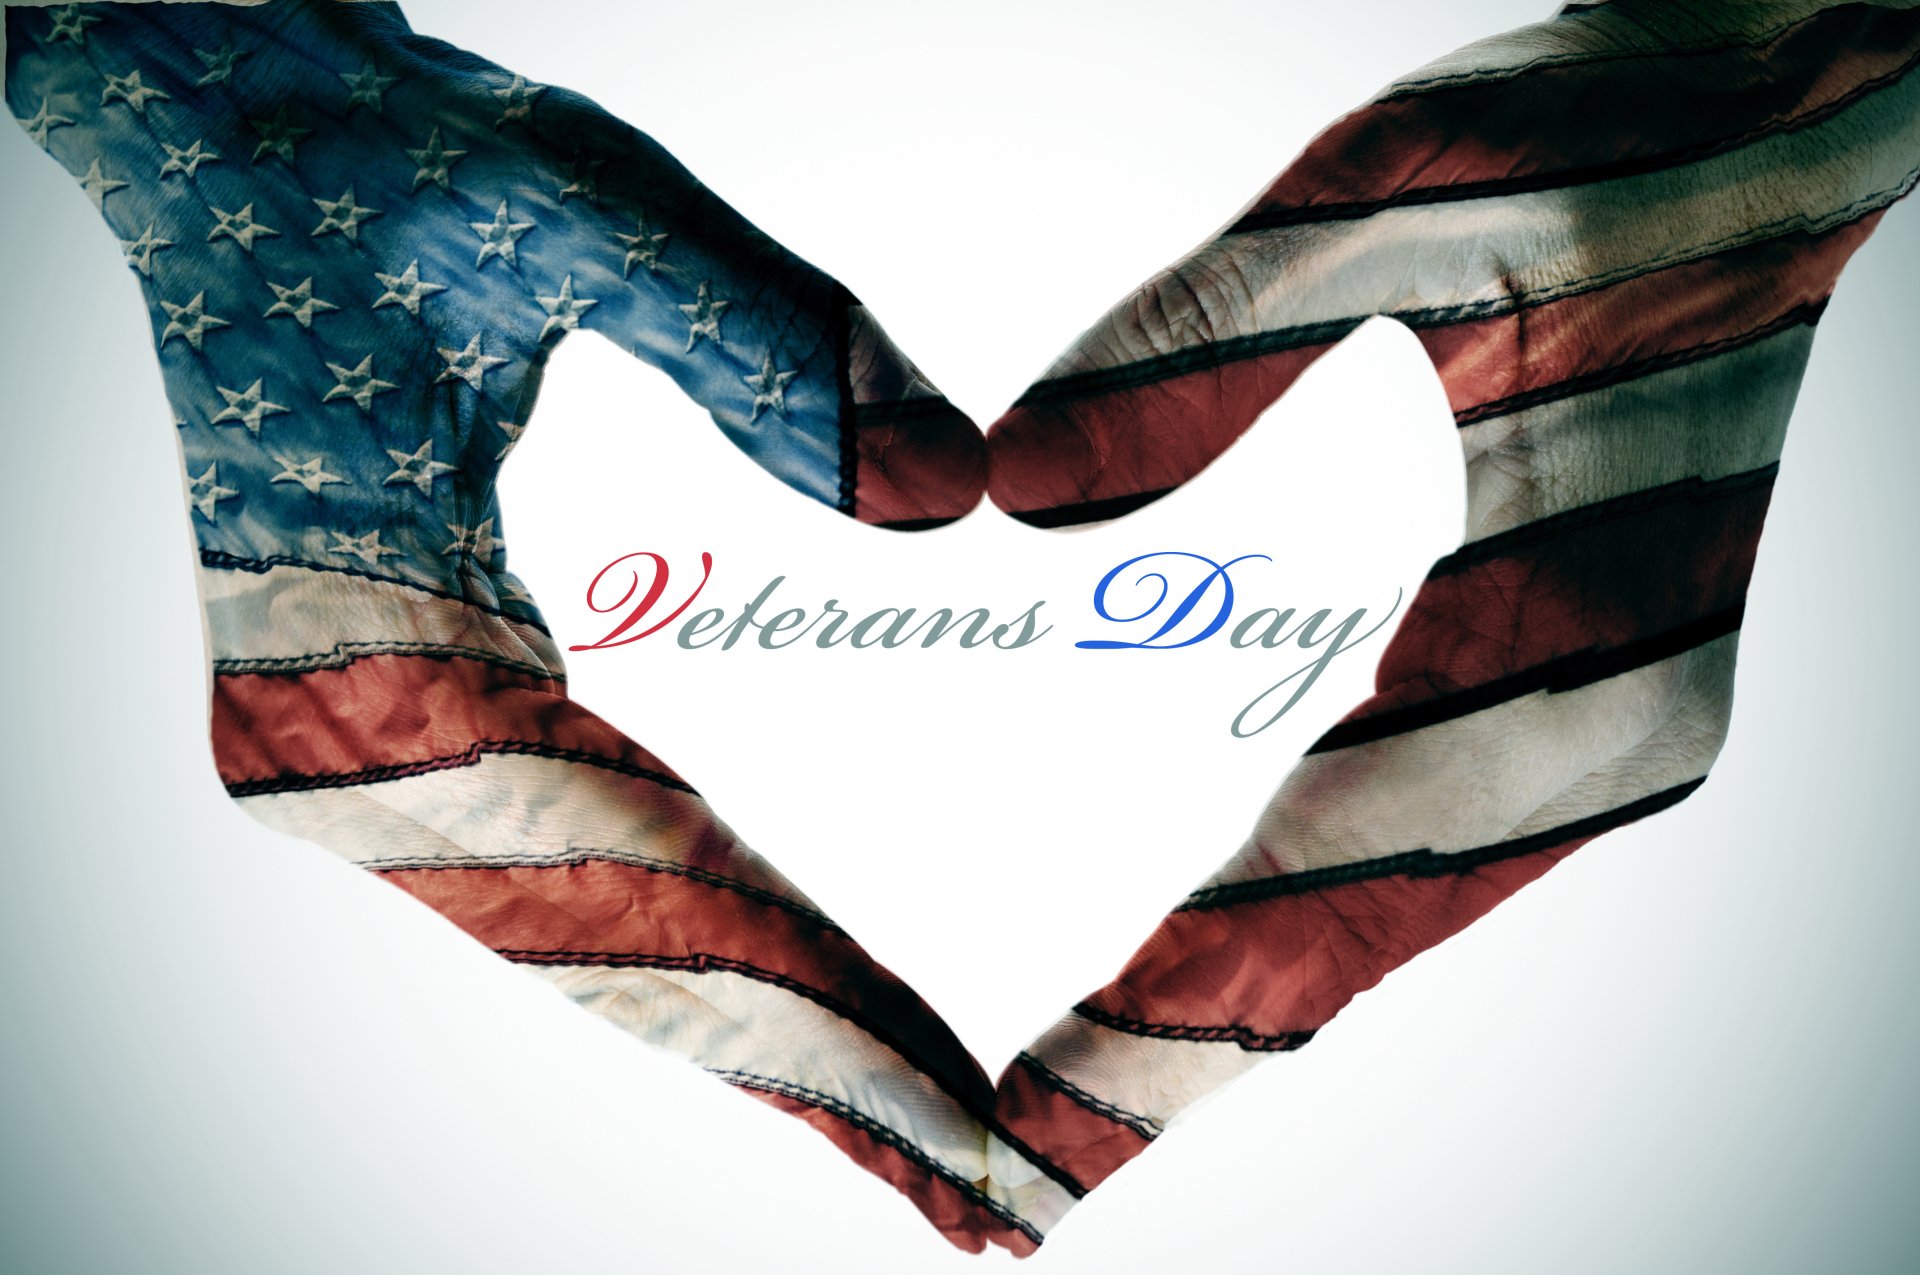 Veterans Day 4k Ultra HD Wallpaper and Background Image ...